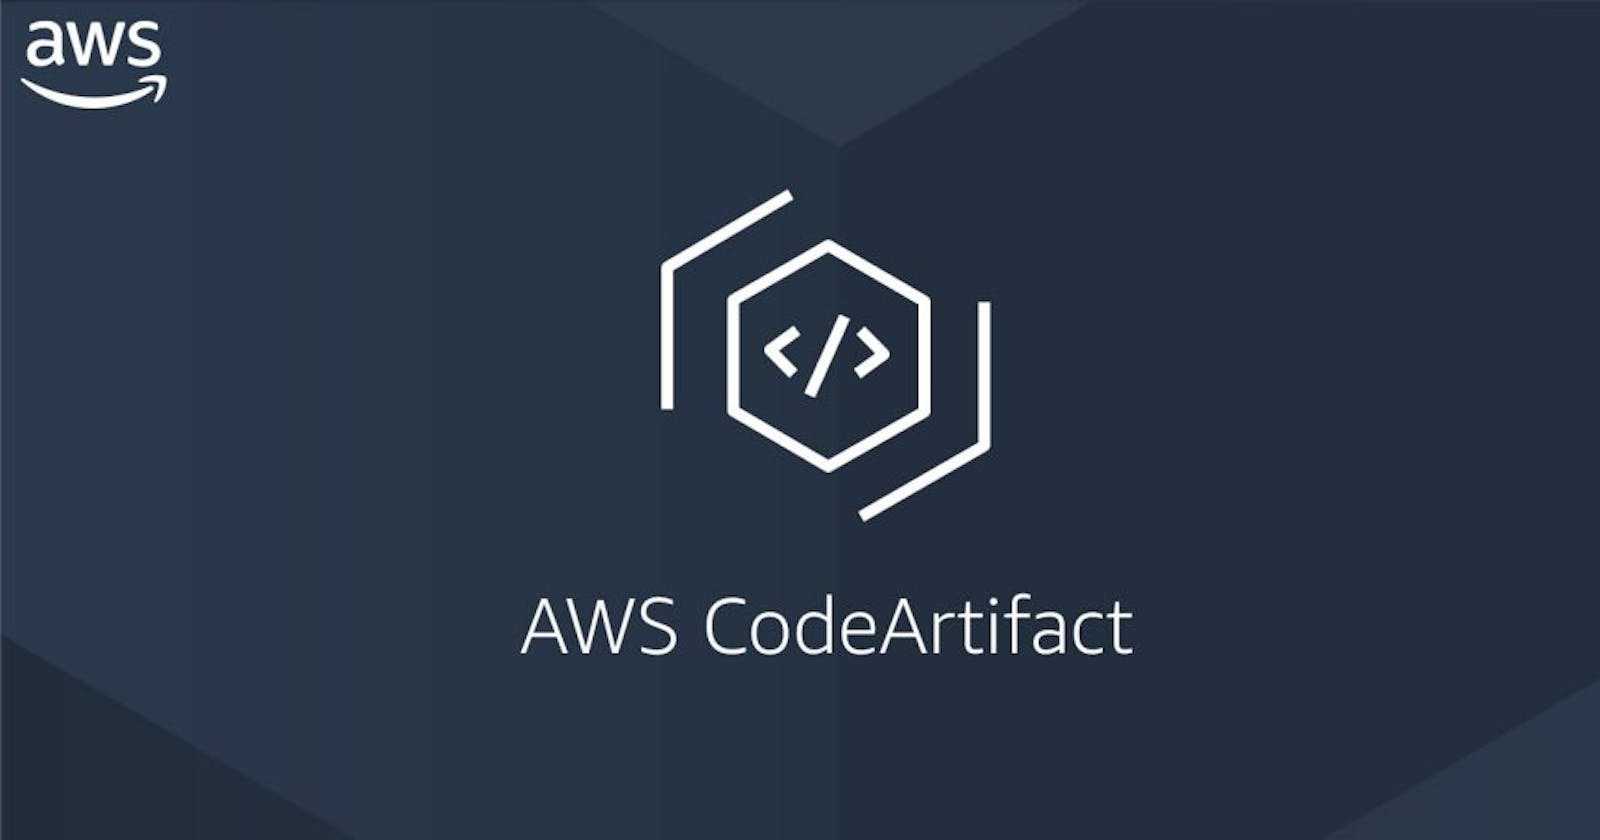 Implementing AWS CodeArtifact in AWS